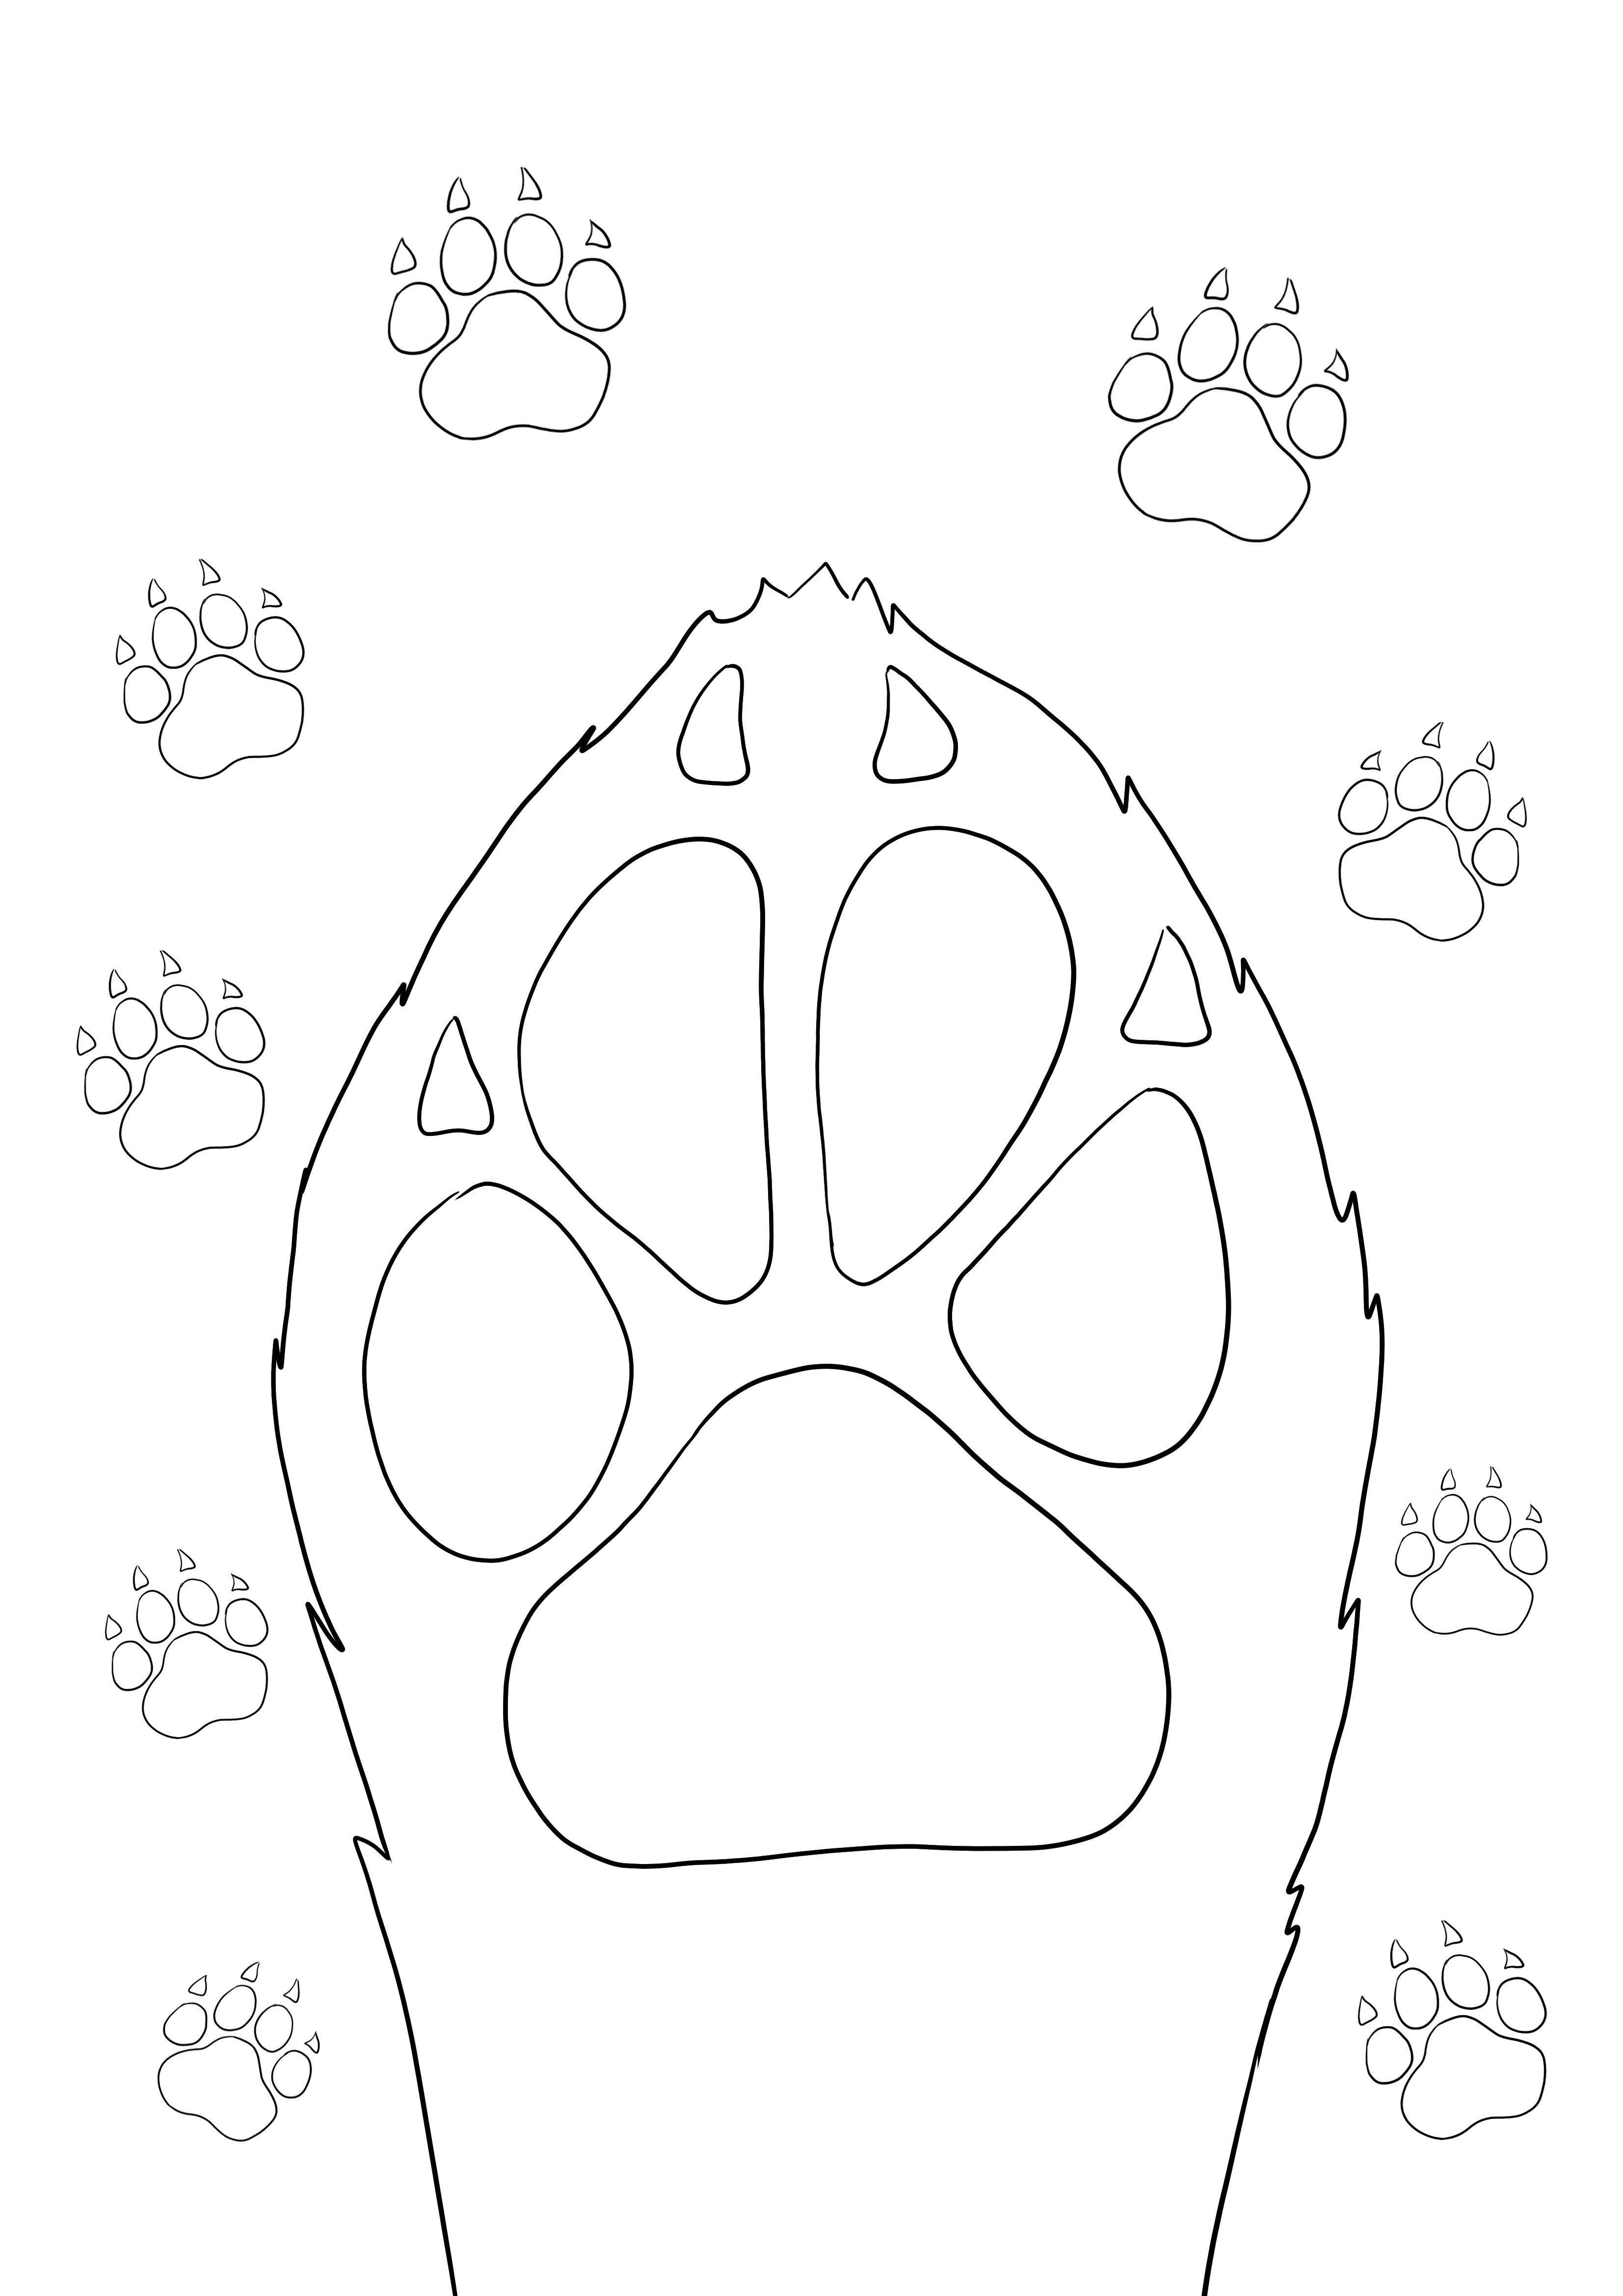 free-coloring-of-dog-s-paw-and-prints-for-kids